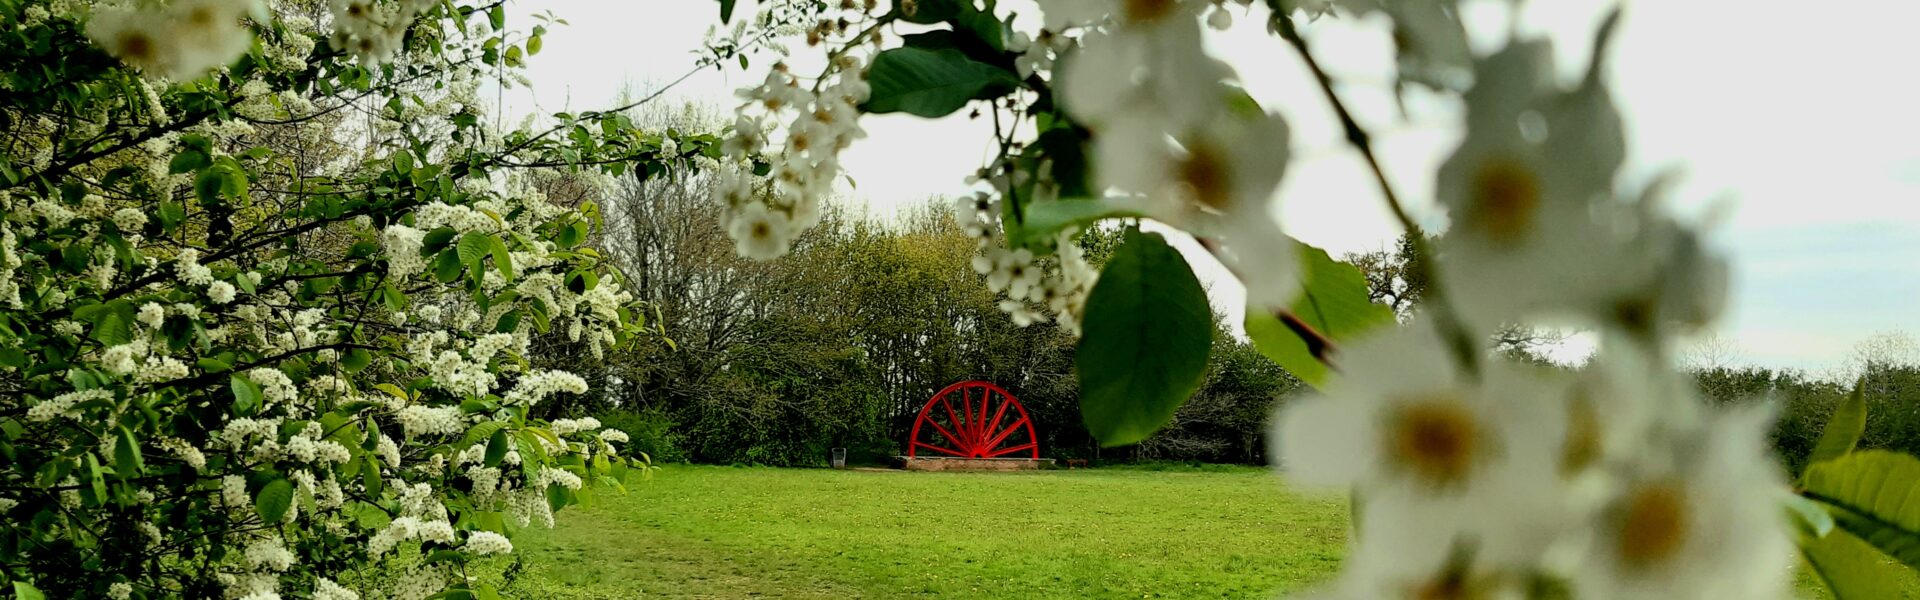 A photograph of a blossoming bower in the foreground, through which, in the background, can be seen a meadow field with a large red half-wheel at the far end of the meadow,